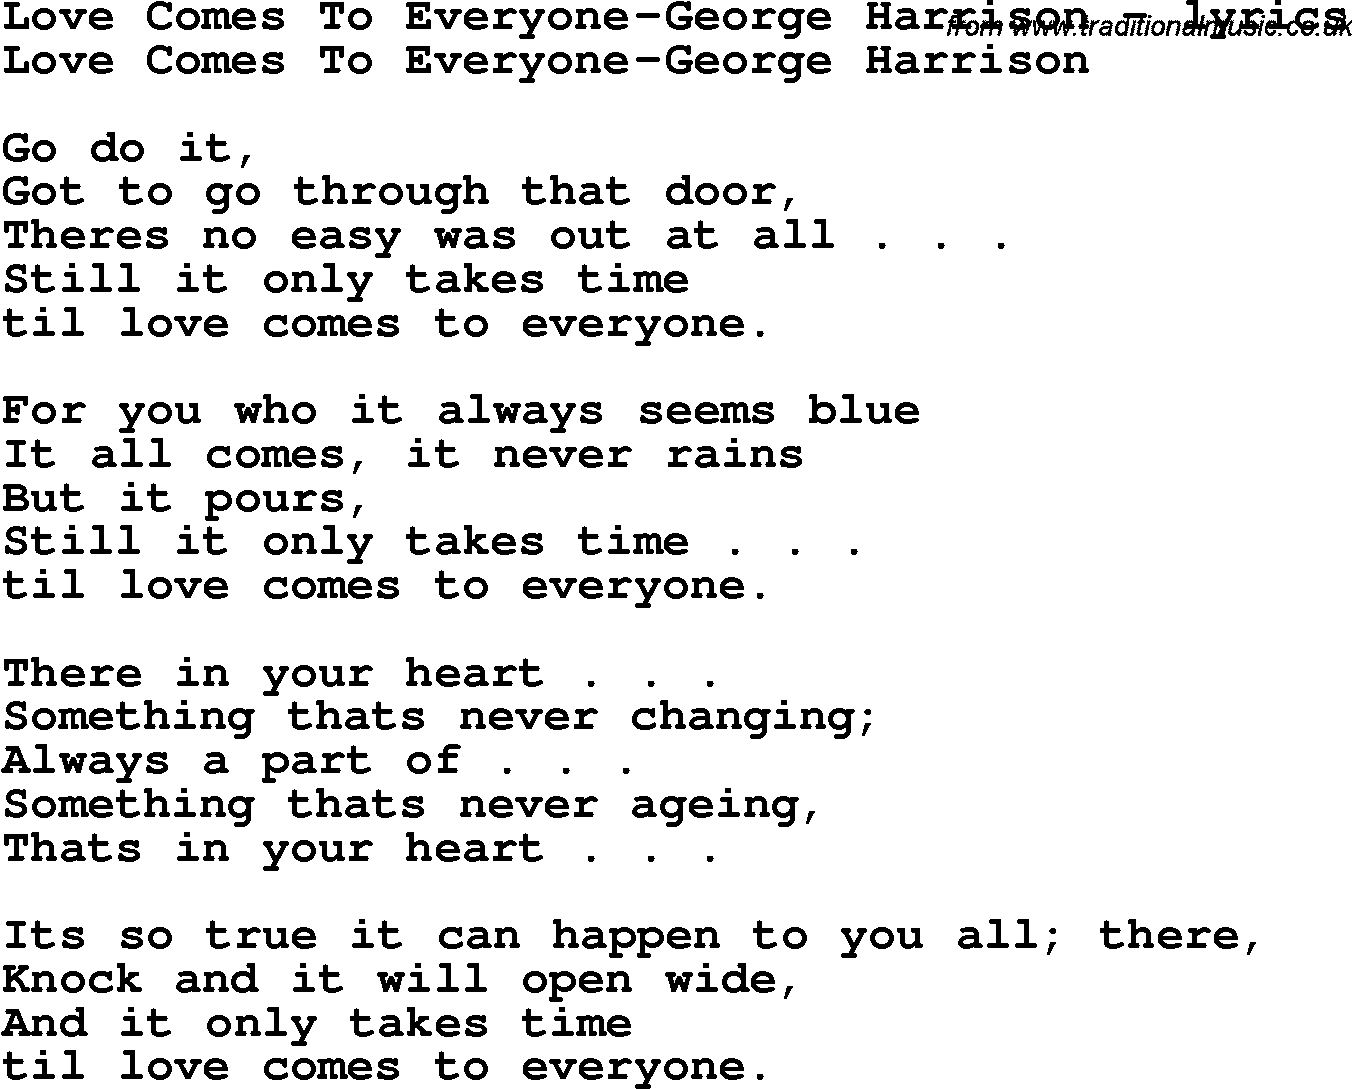 Love Song Lyrics for: Love Comes To Everyone-George Harrison